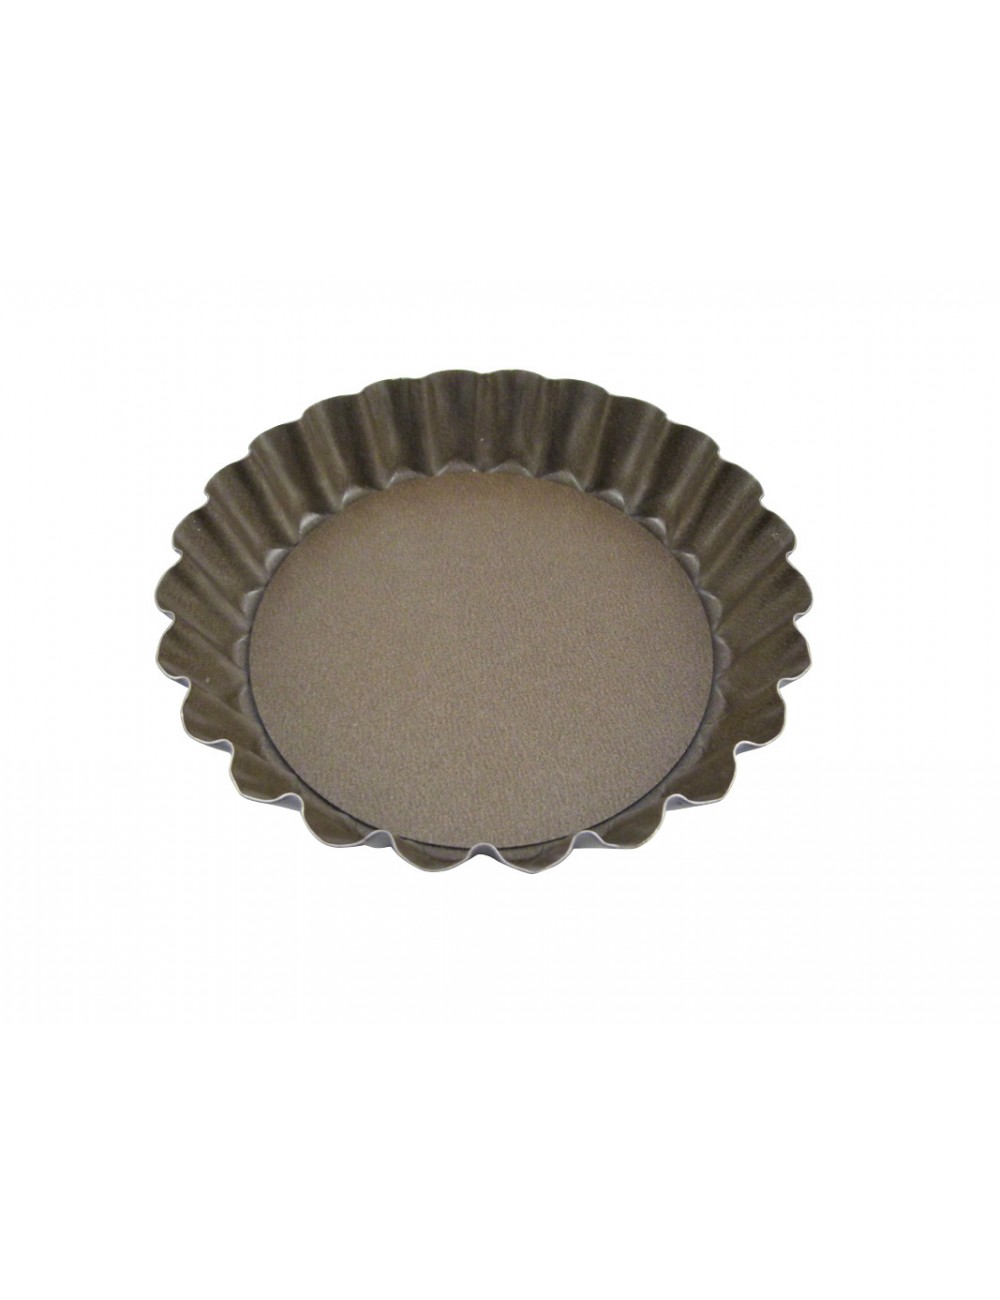 TARTELETTE RONDE CANNELEE - FOND MOBILE - ANTI-ADHERENT